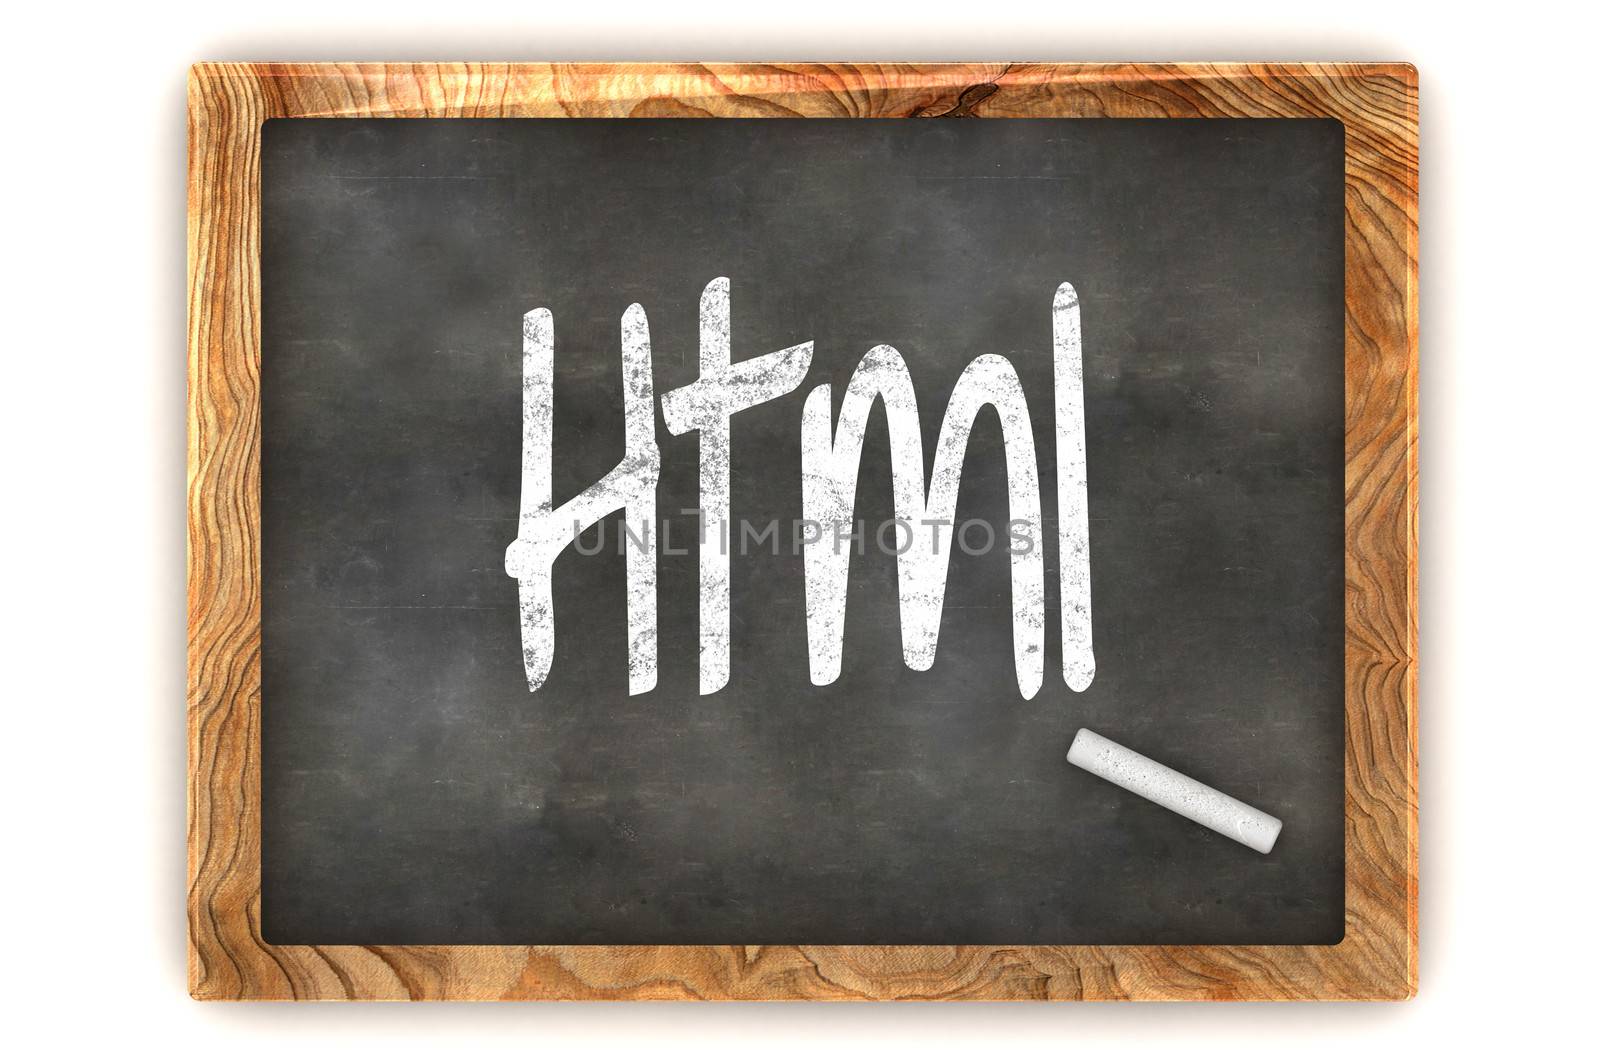 A Colourful 3d Rendered Concept Illustration showing "Html" writen on a Blackboard with white chalk